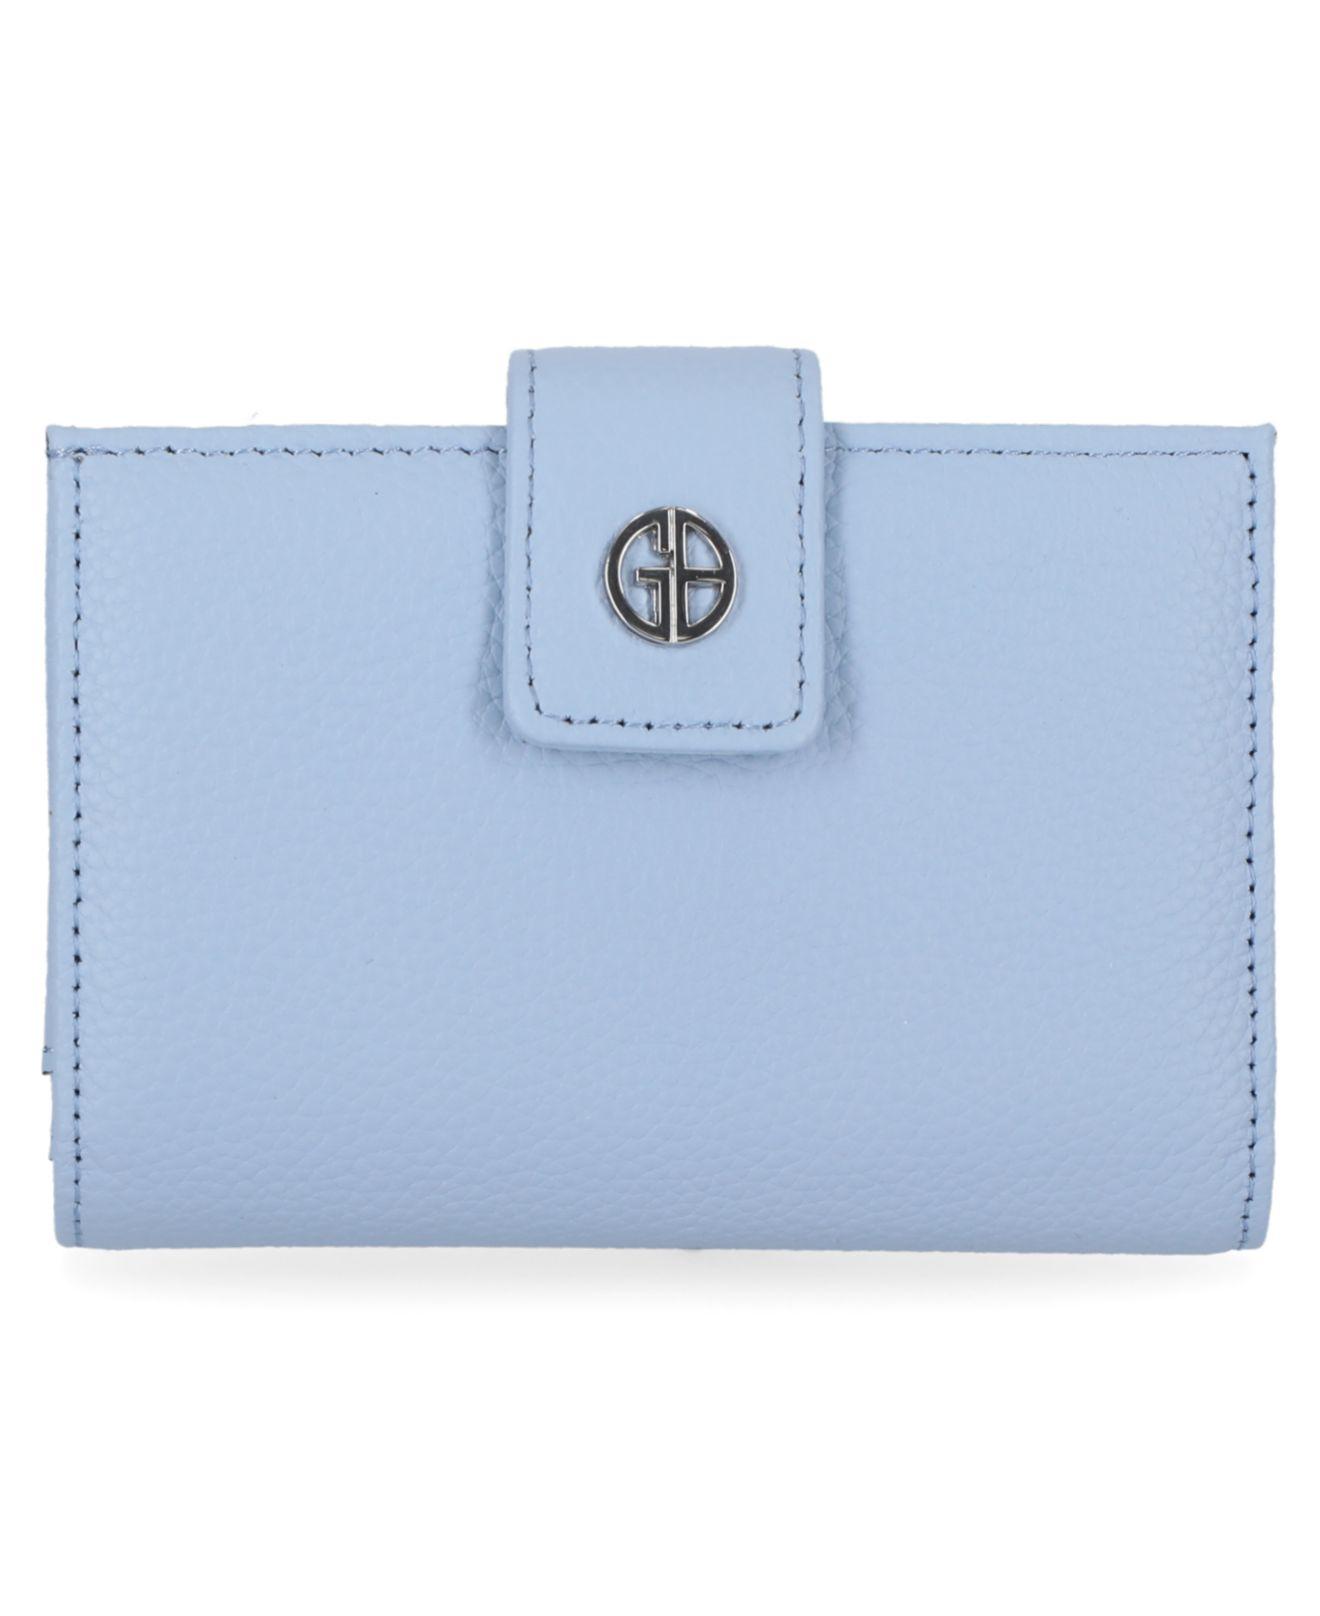 Giani Bernini Framed Indexer Leather Wallet, Created For Macy's in Blue